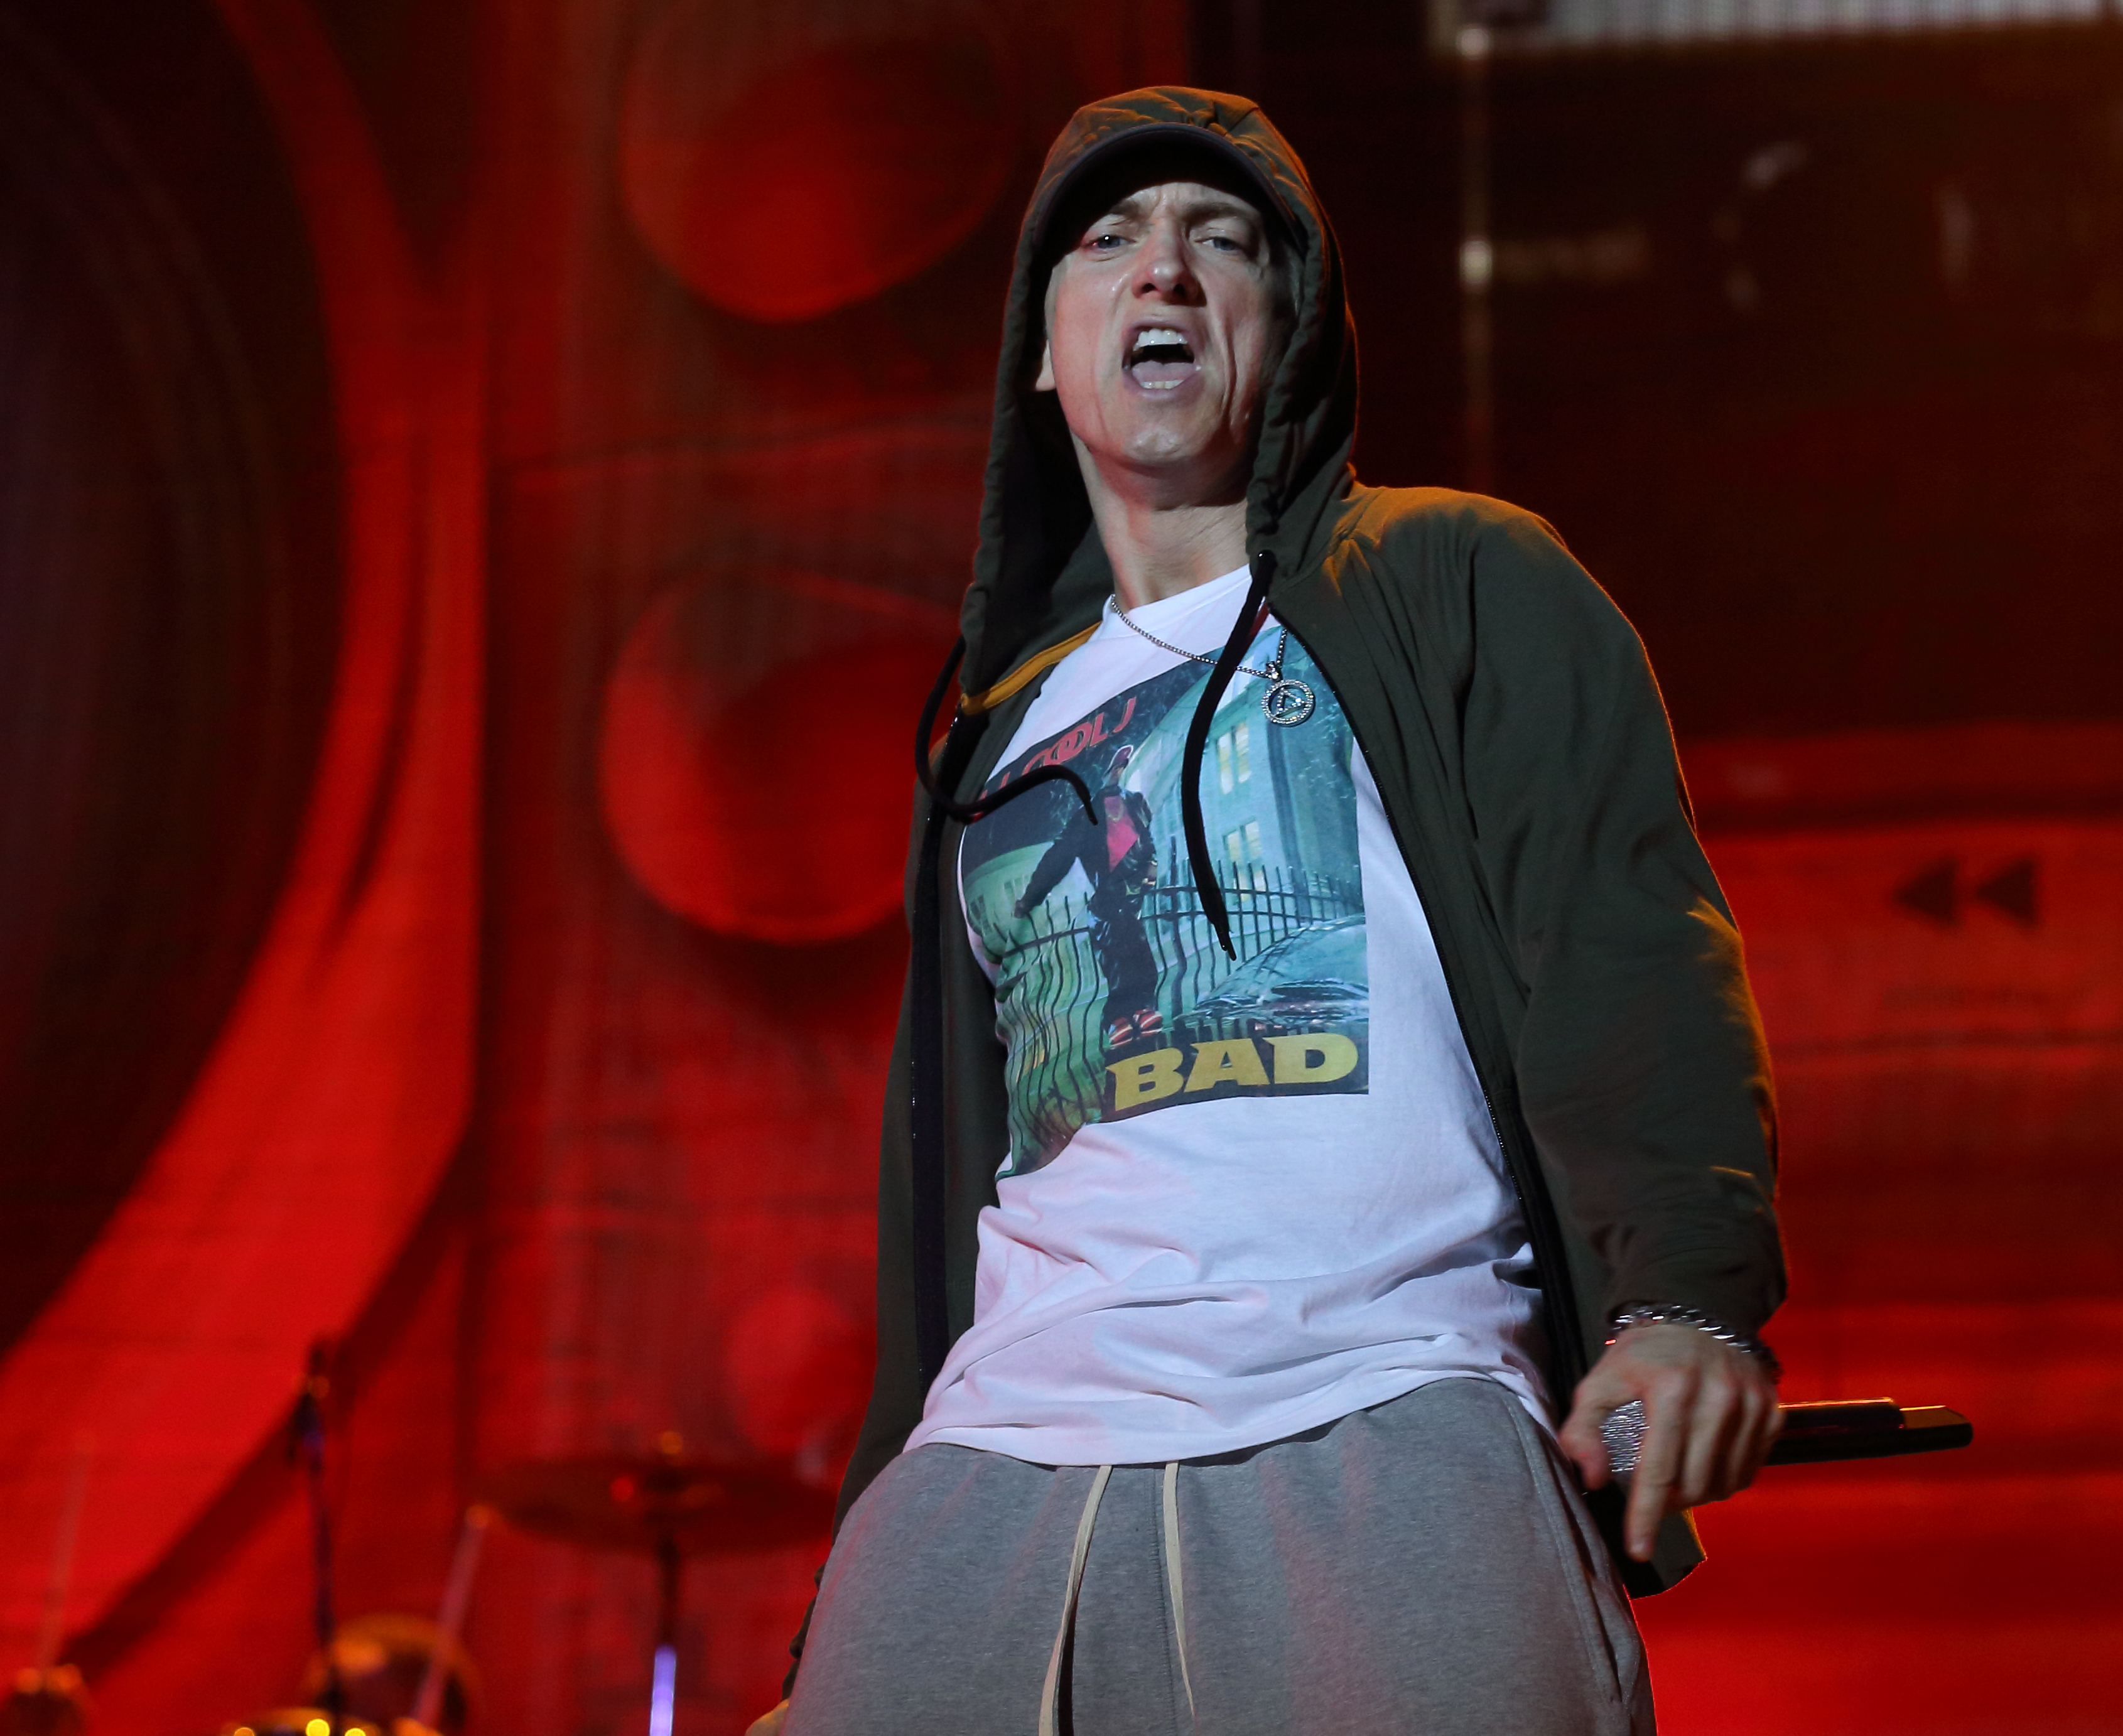 Eminem performs at Lollapalooza in Chicago's Grant Park on Friday, Aug. 1, 2014. (Steve C Mitchell—Invision/AP)